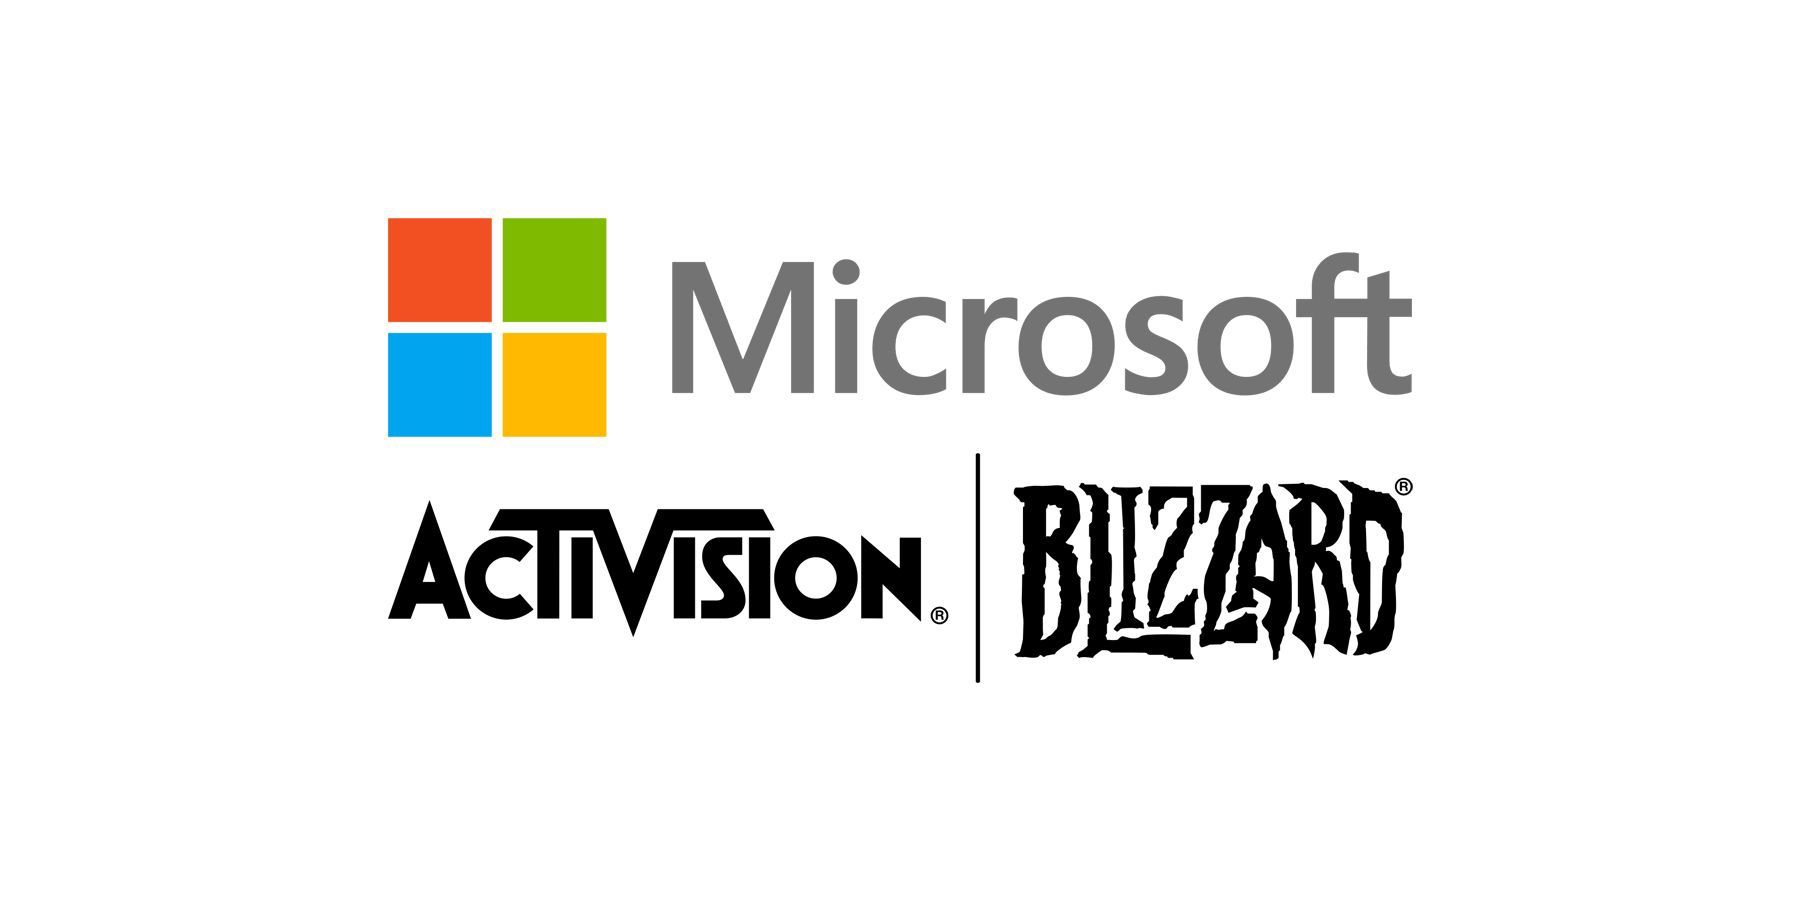 European Commission Investigating Microsofts Acquisition of Activision Blizzard